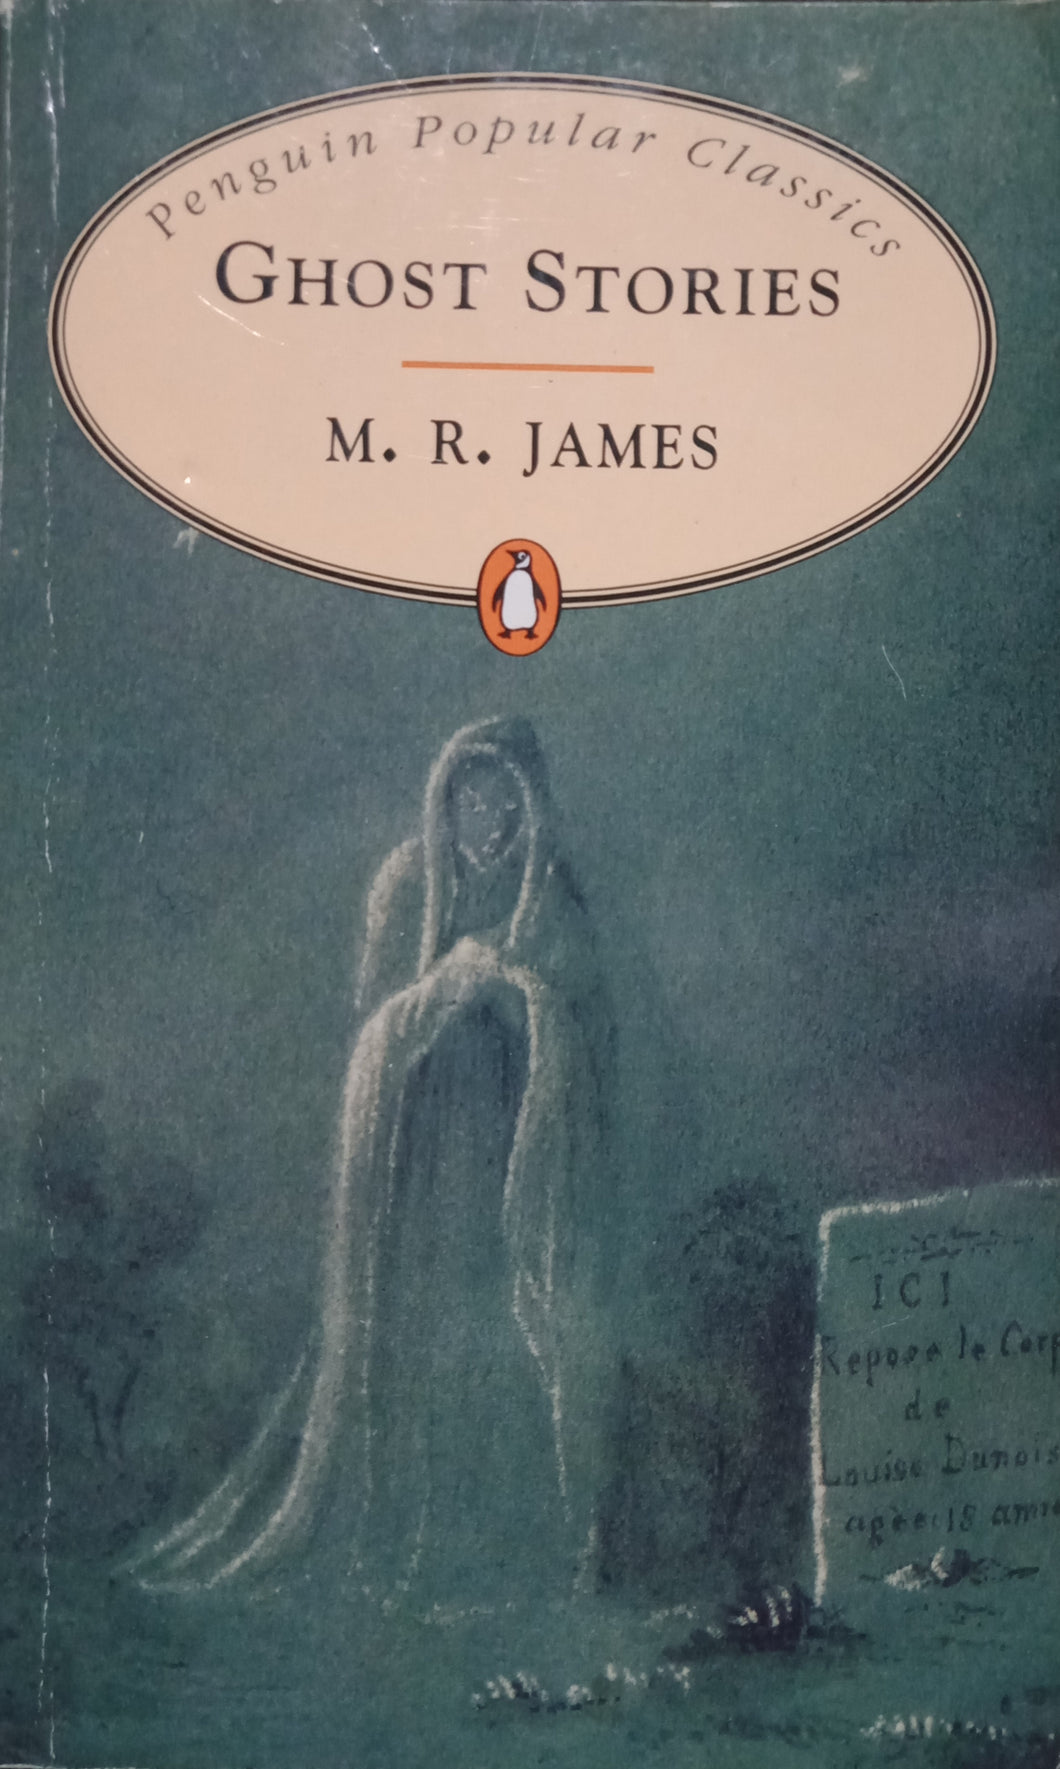 Ghost Stories by M.R.James